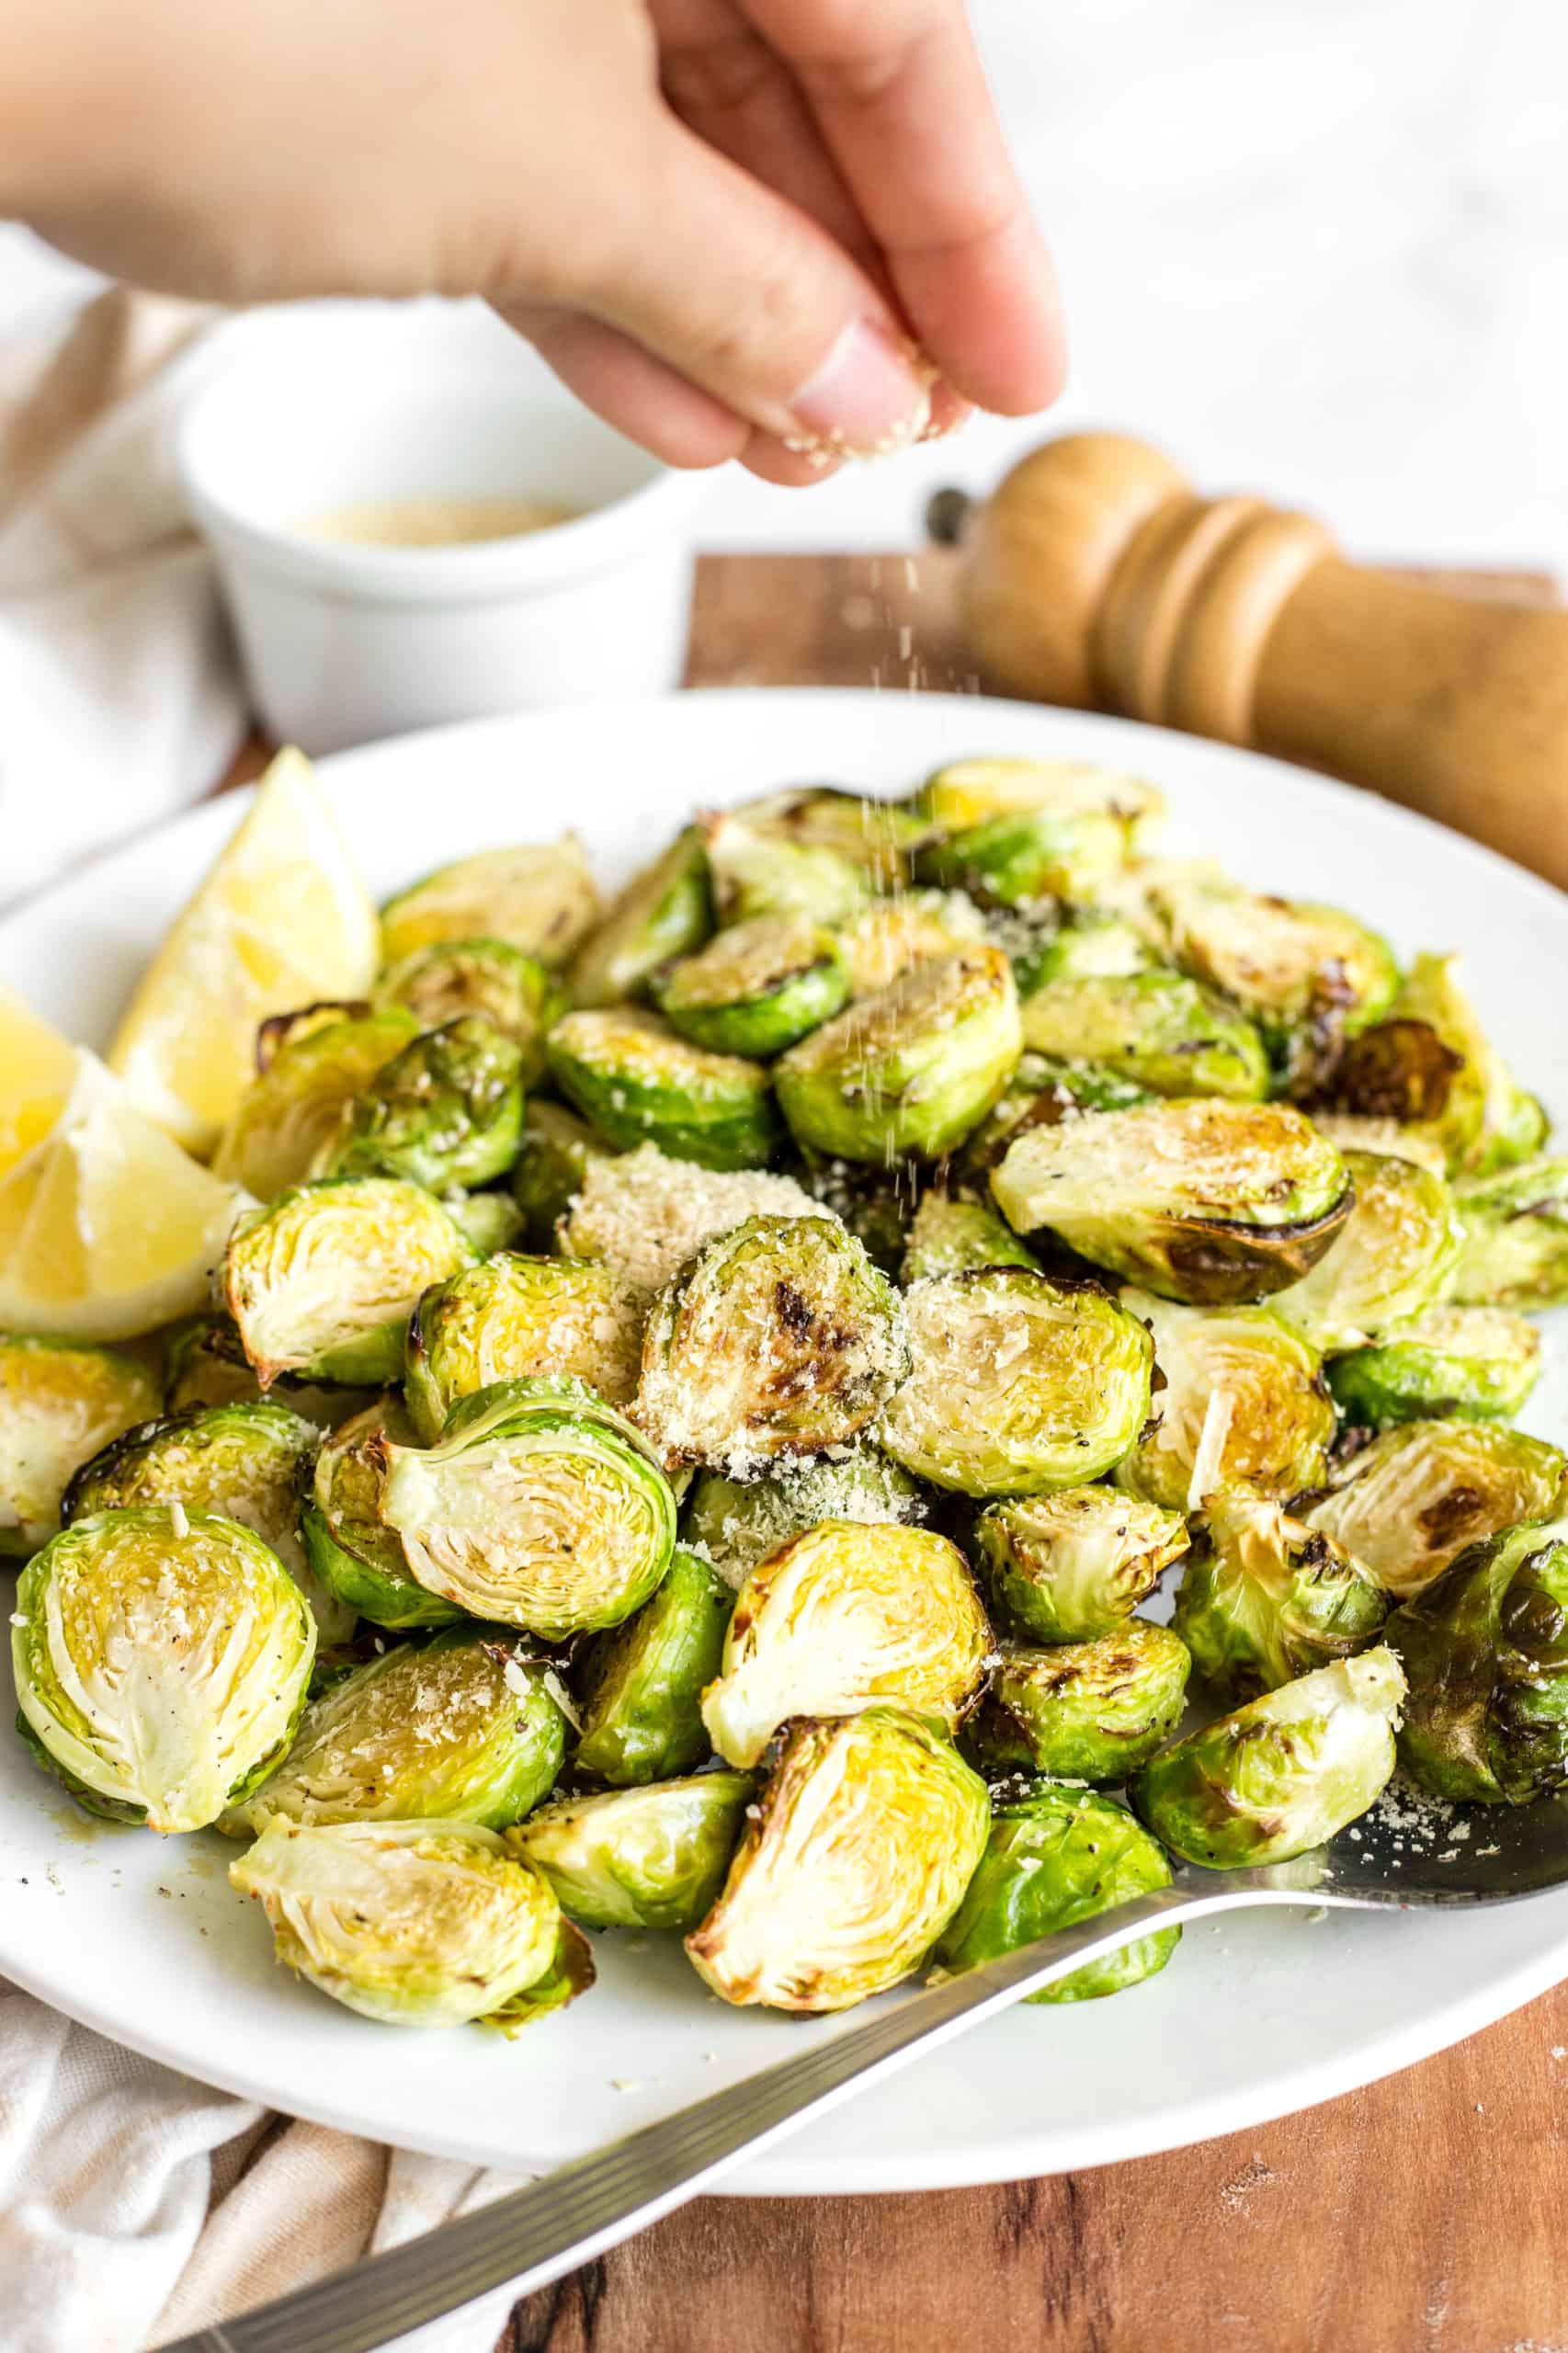 A hand sprinkling nutrional yeast on top of a plate full of crispy Brussels sprouts.